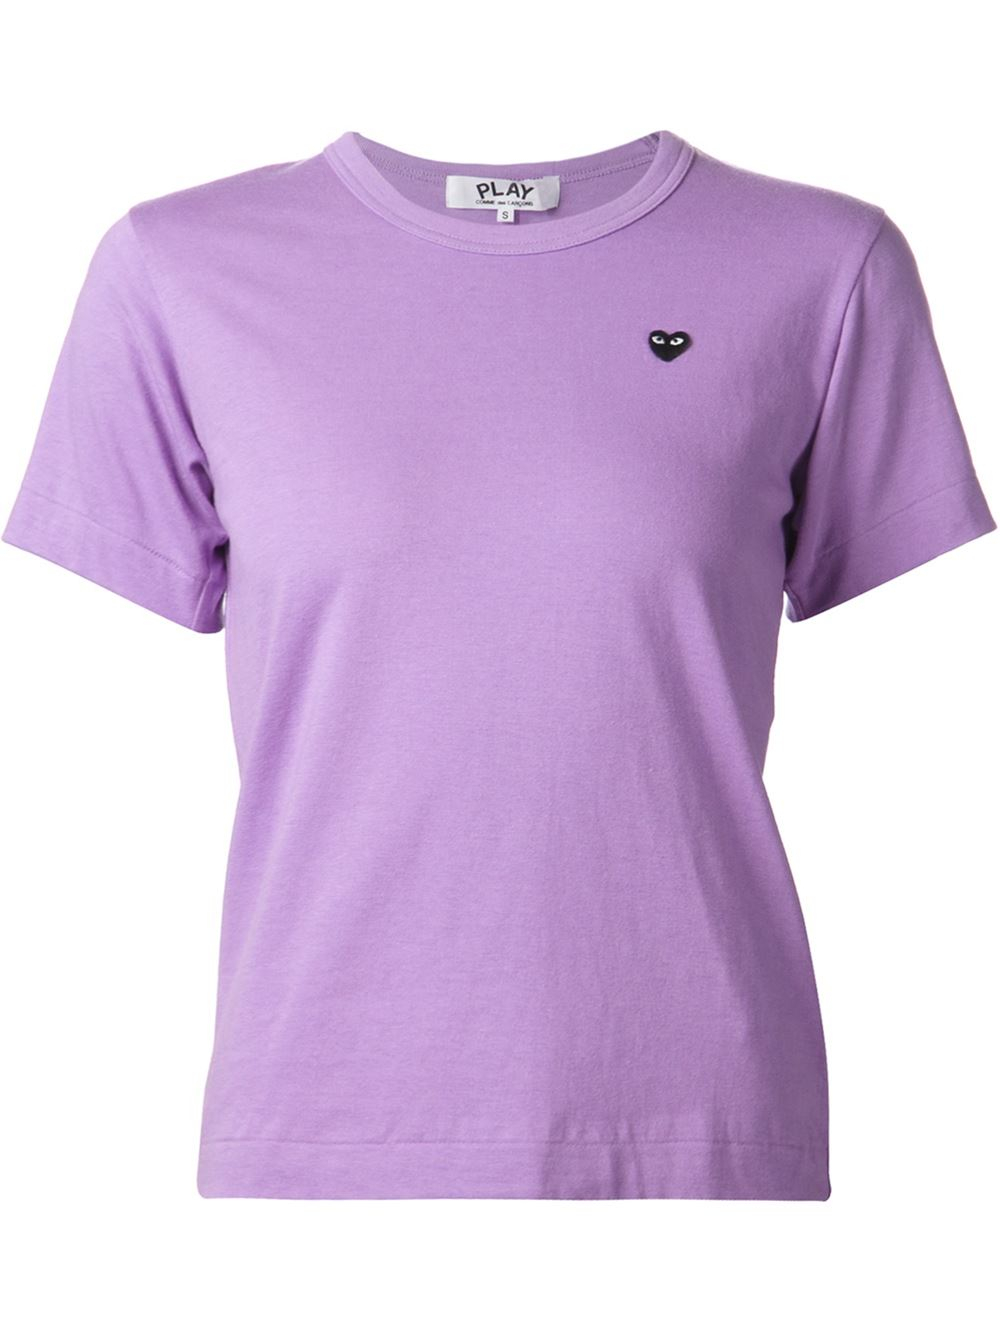 Play comme des garçons Embroidered Heart T-shirt in Purple (pink ...